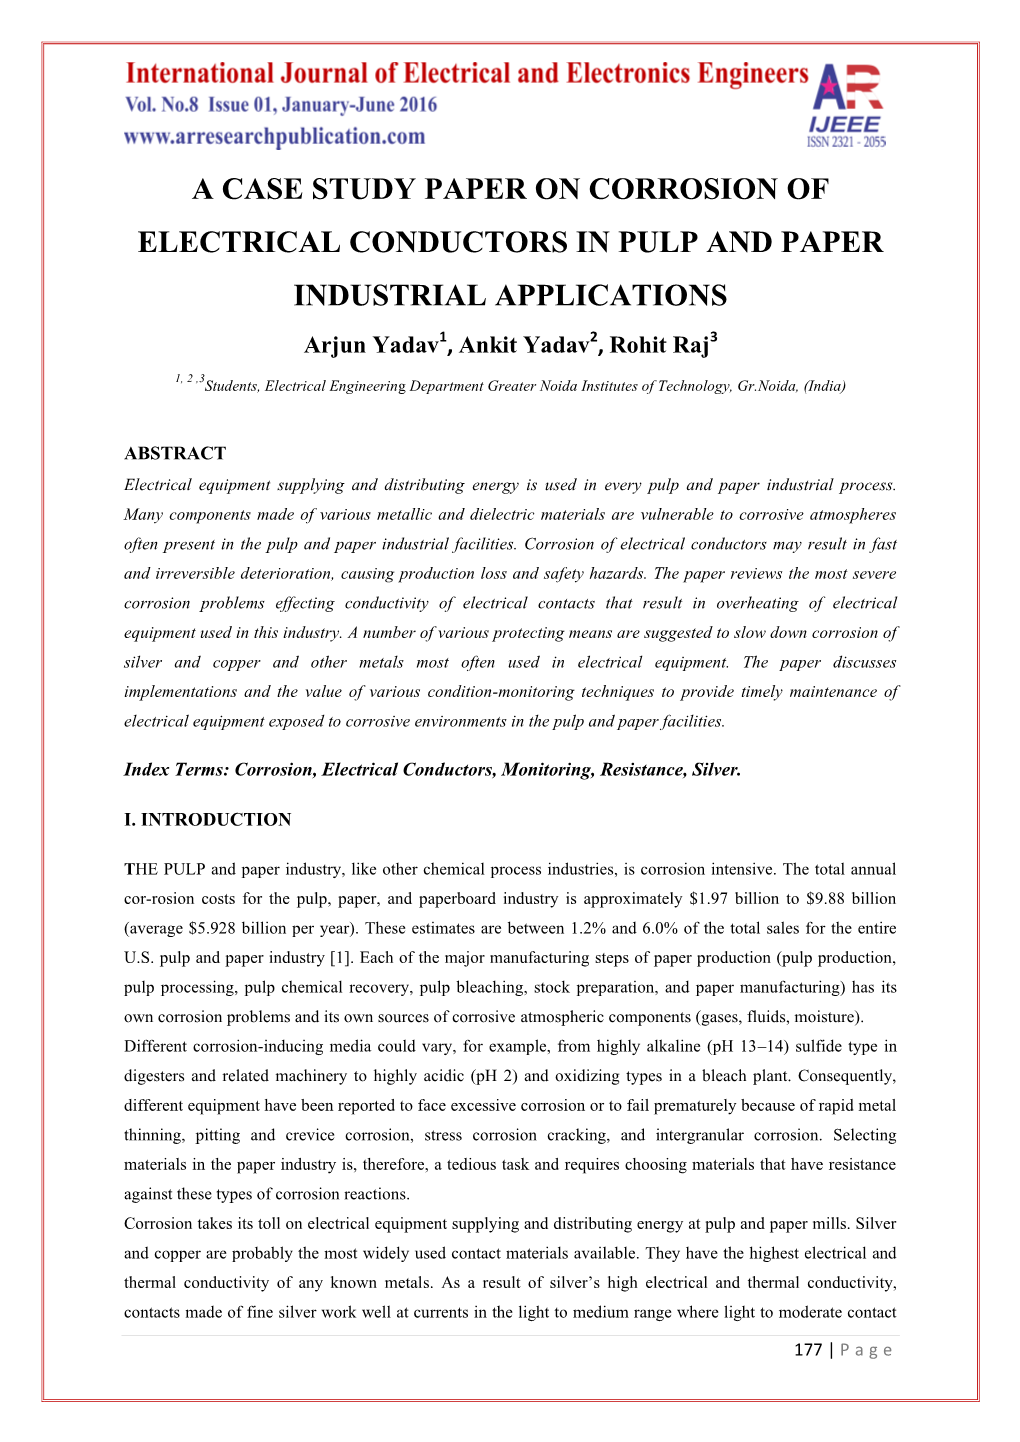 CASE STUDY PAPER on CORROSION of ELECTRICAL CONDUCTORS in PULP and PAPER INDUSTRIAL APPLICATIONS Arjun Yadav1, Ankit Yadav2, Rohit Raj3